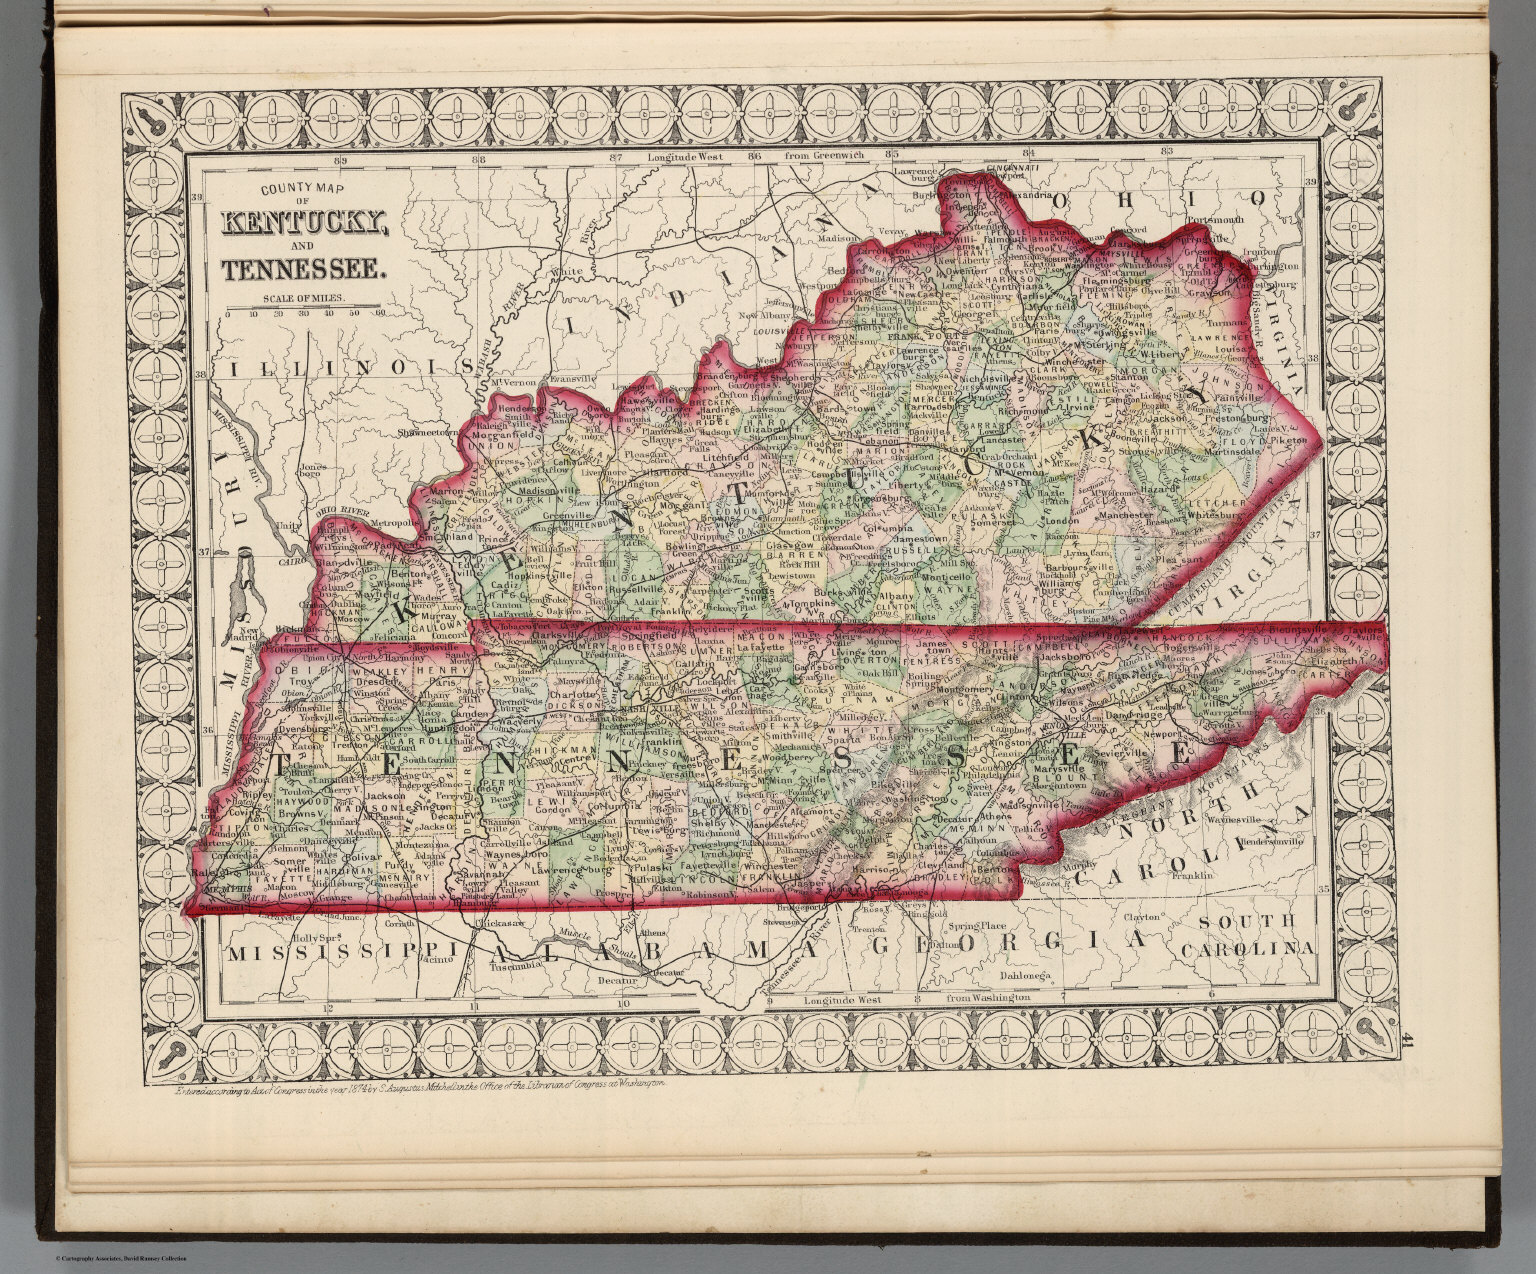 county-map-of-kentucky-and-tennessee-david-rumsey-historical-map